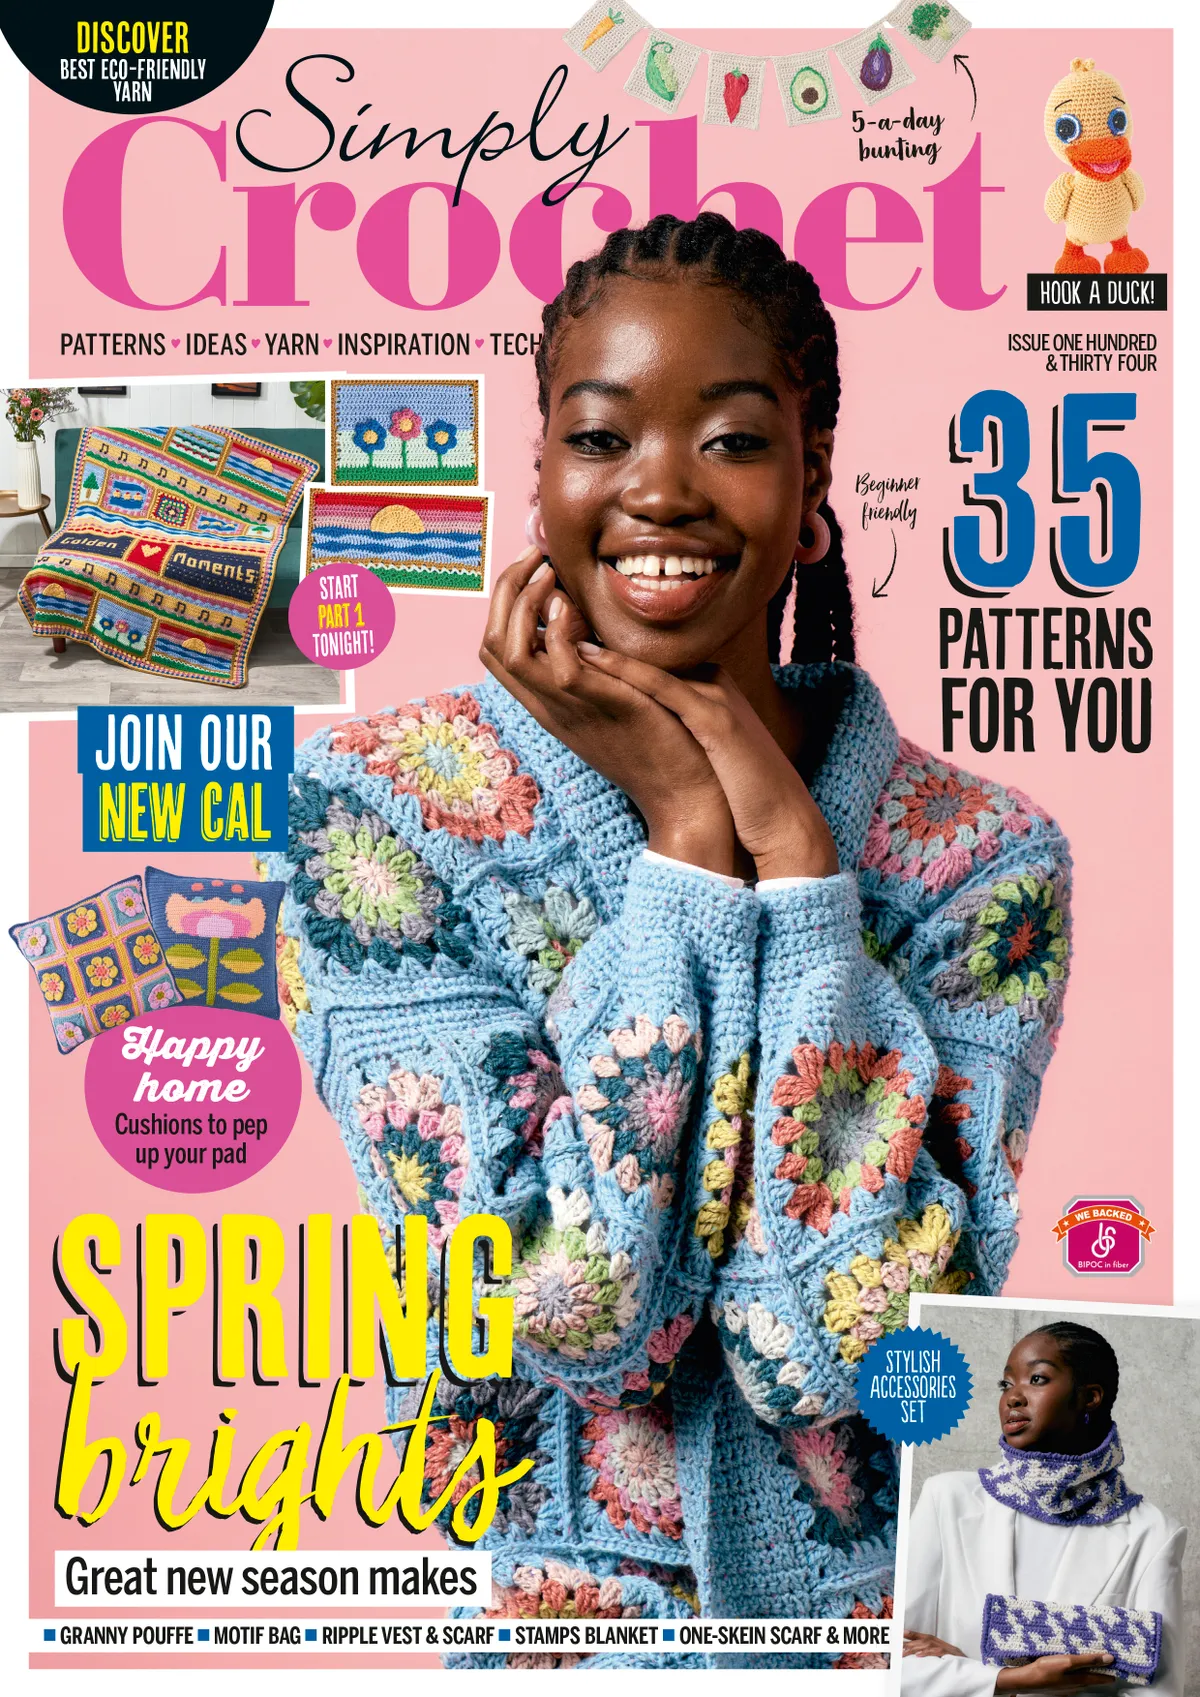 Simply_crochet_new_issue_134